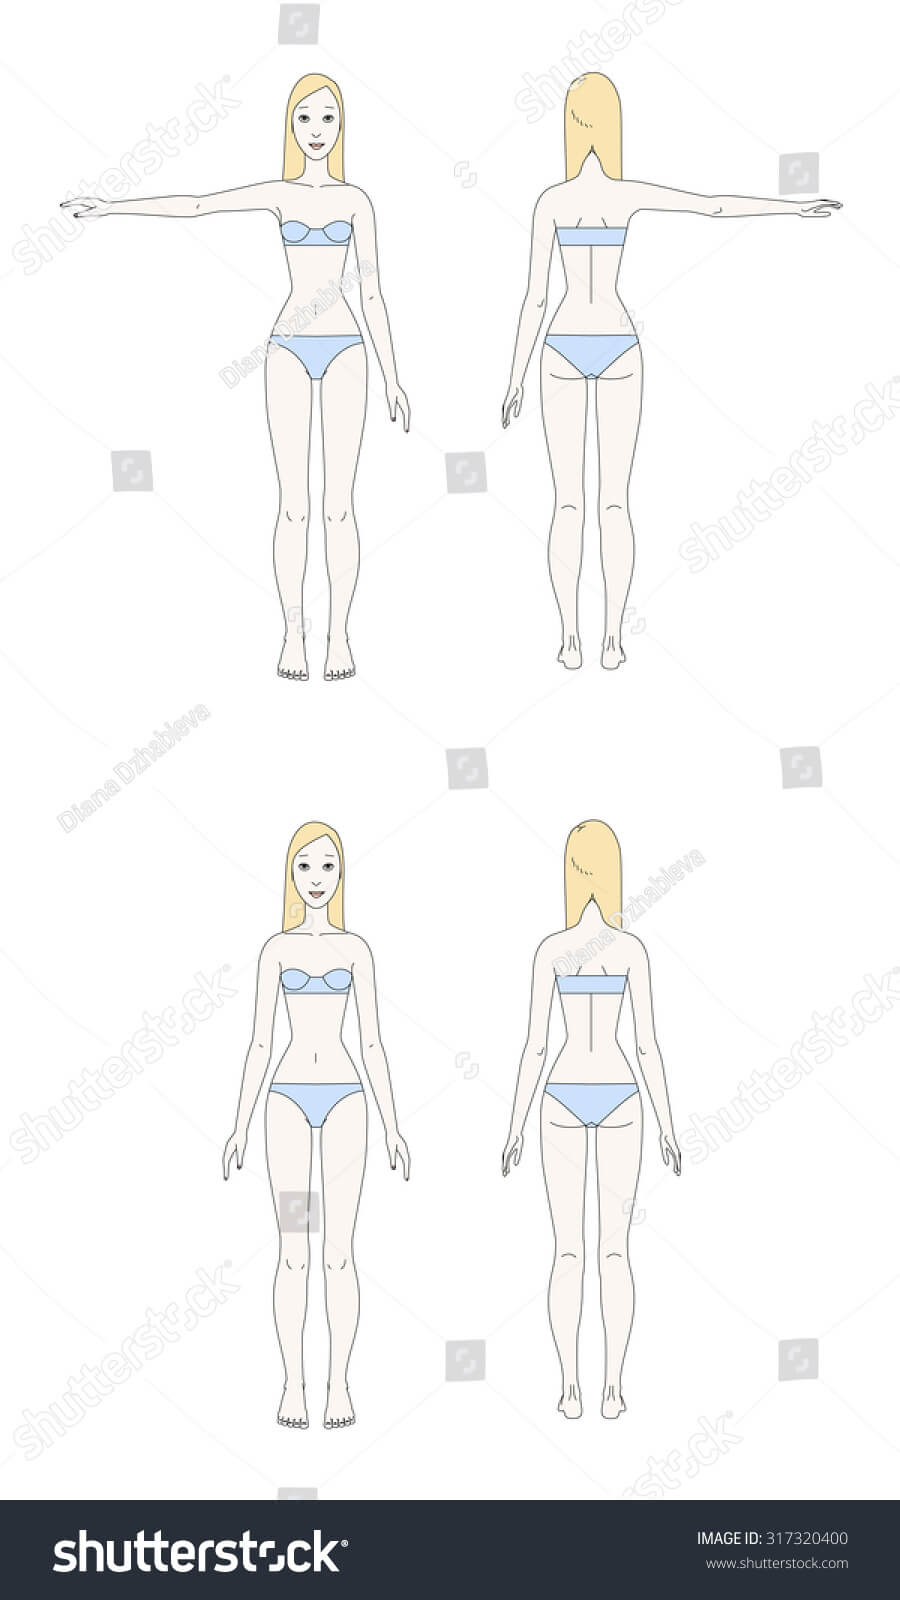 Triggerfingerstitching.blogspot: Female Body Template Pertaining To Blank Body Map Template